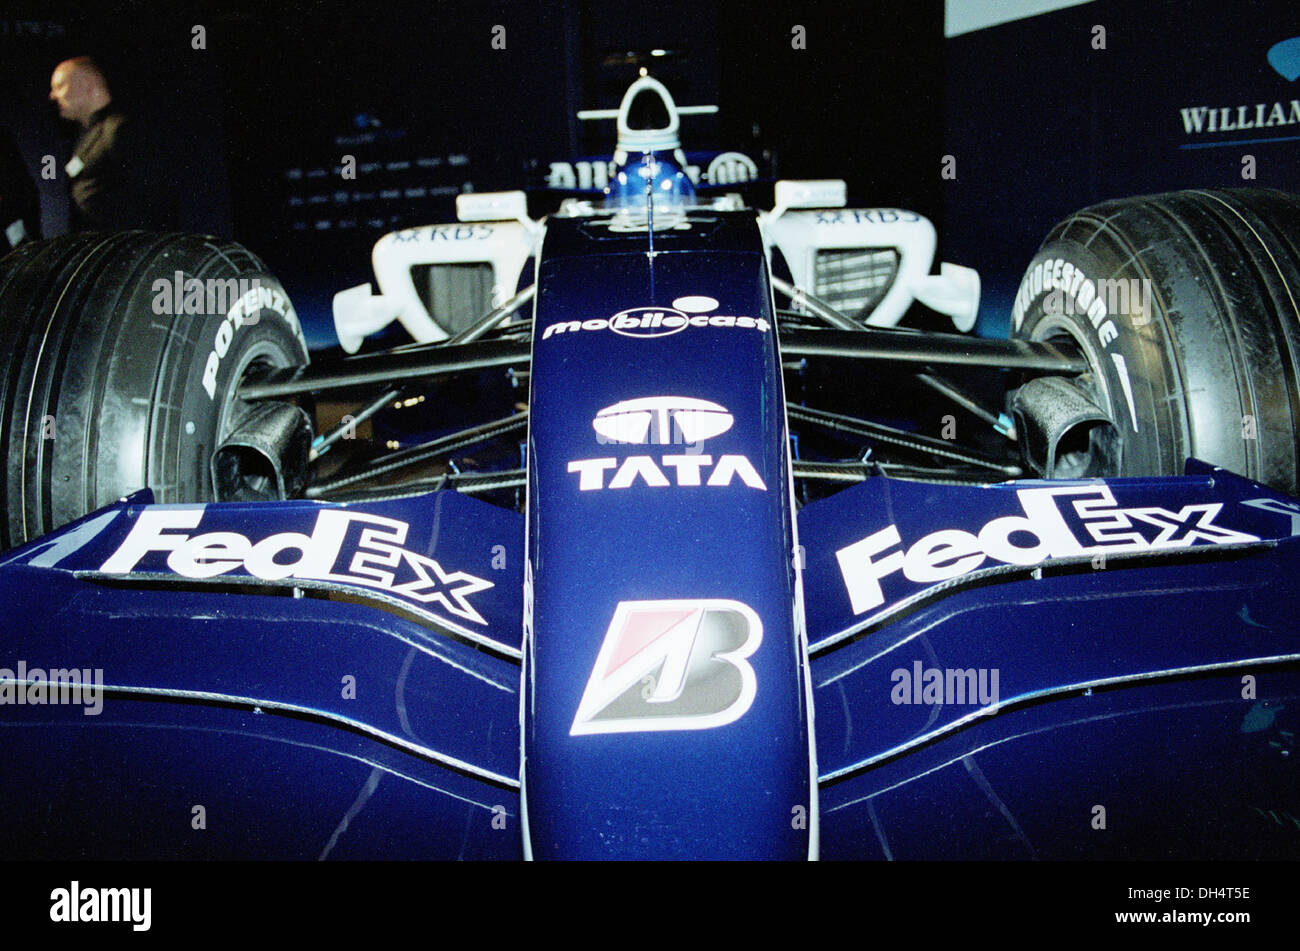 launch-of-williams-formula-one-car-in-20